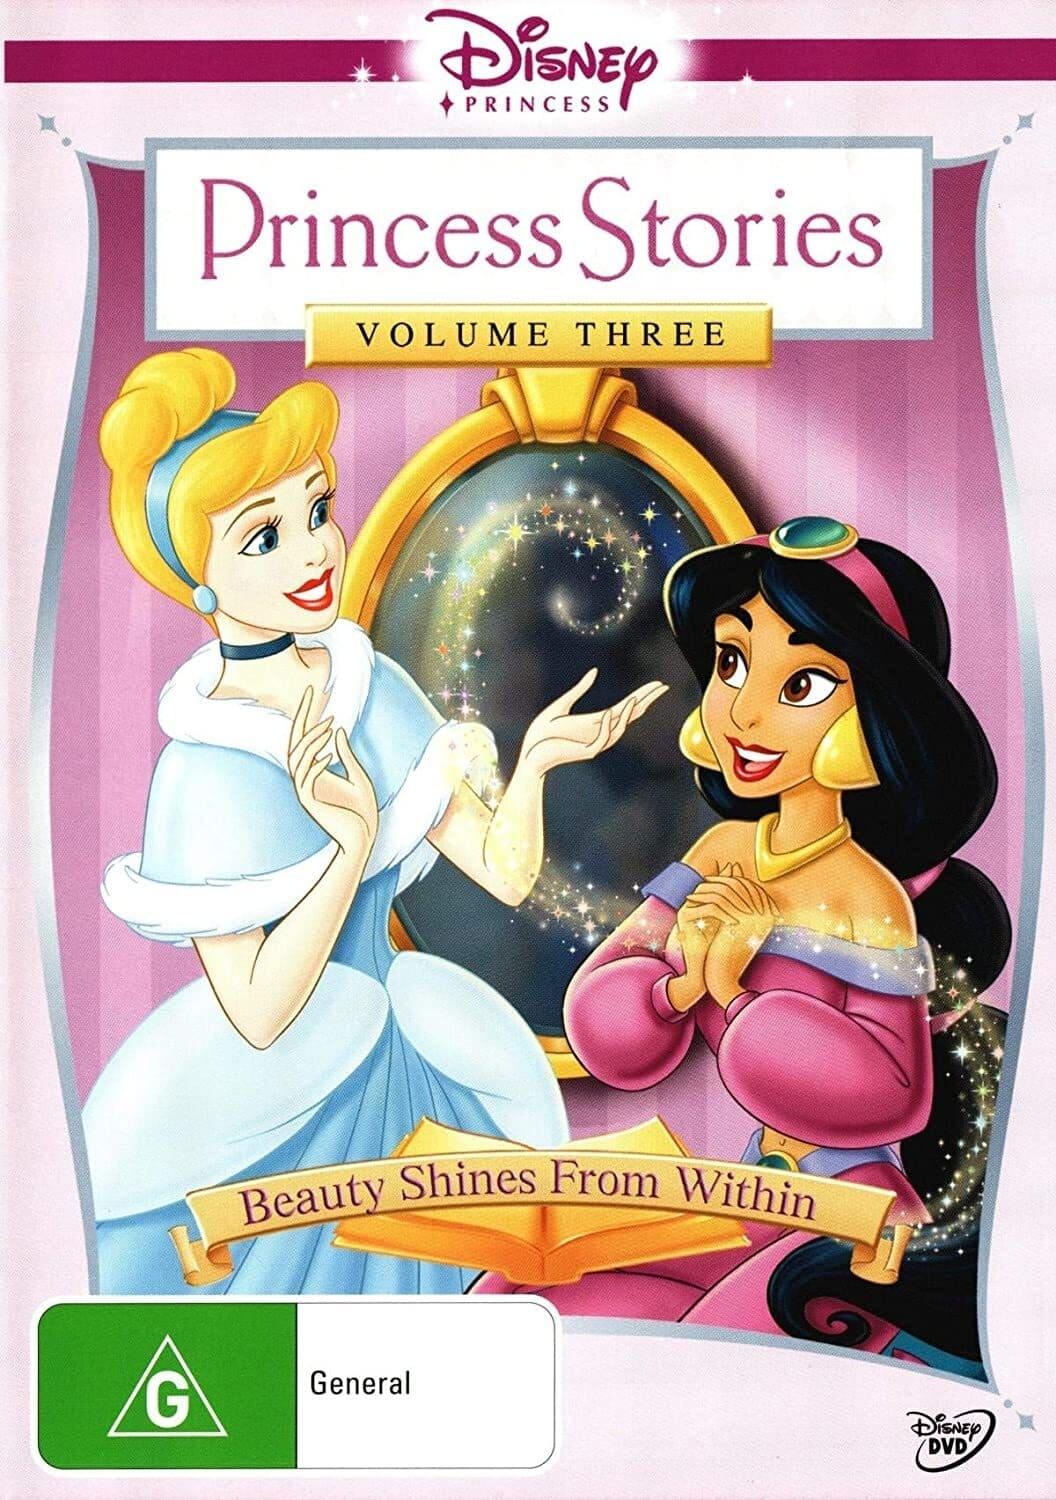 Disney Princess Stories Volume Three: Beauty Shines from Within poster